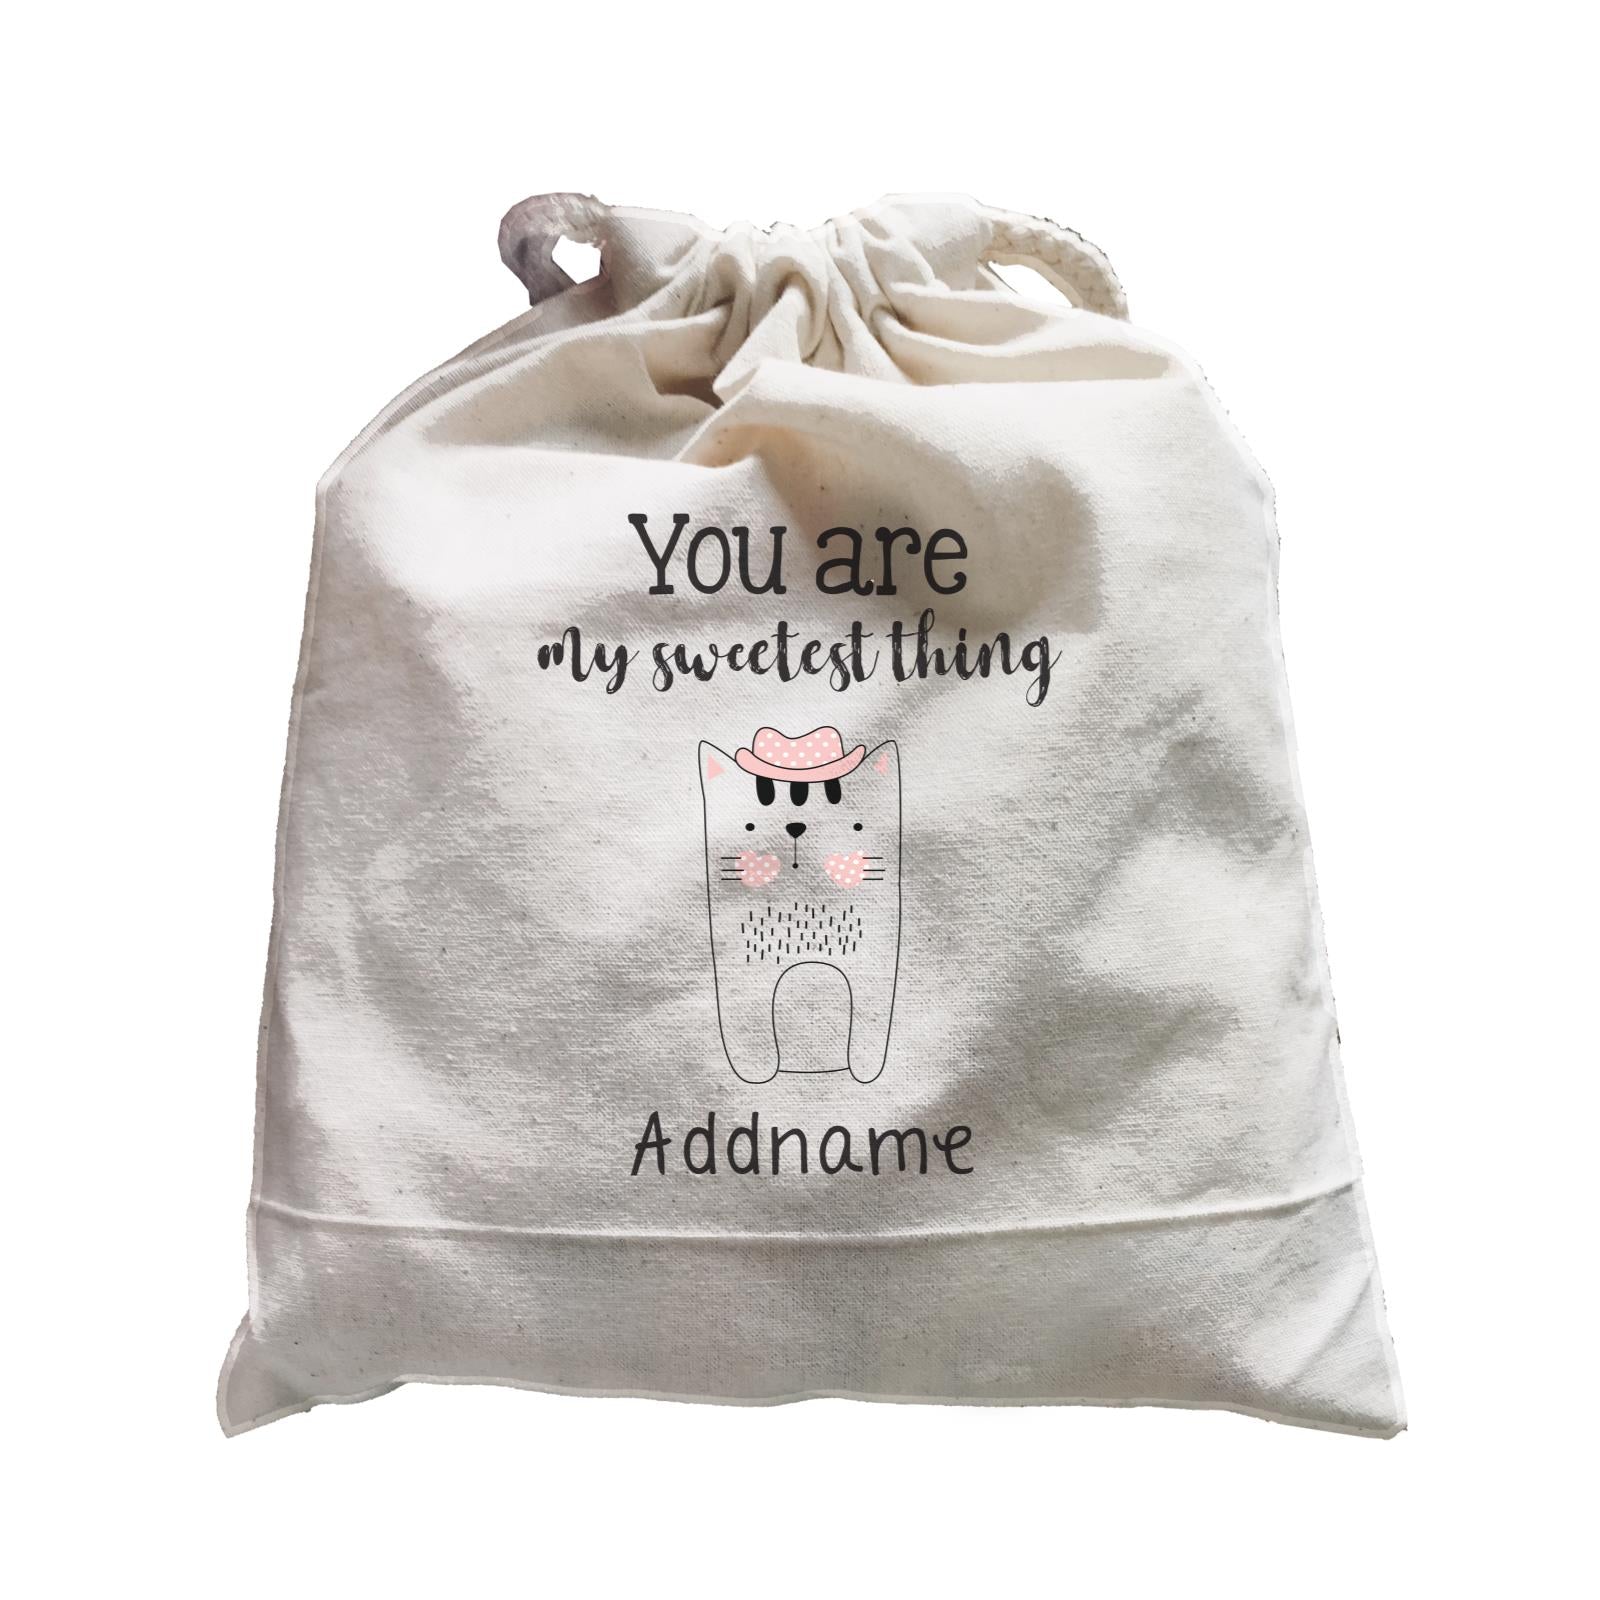 Cute Animals and Friends Series 2 Cat You Are My Sweetest Things Addname Satchel